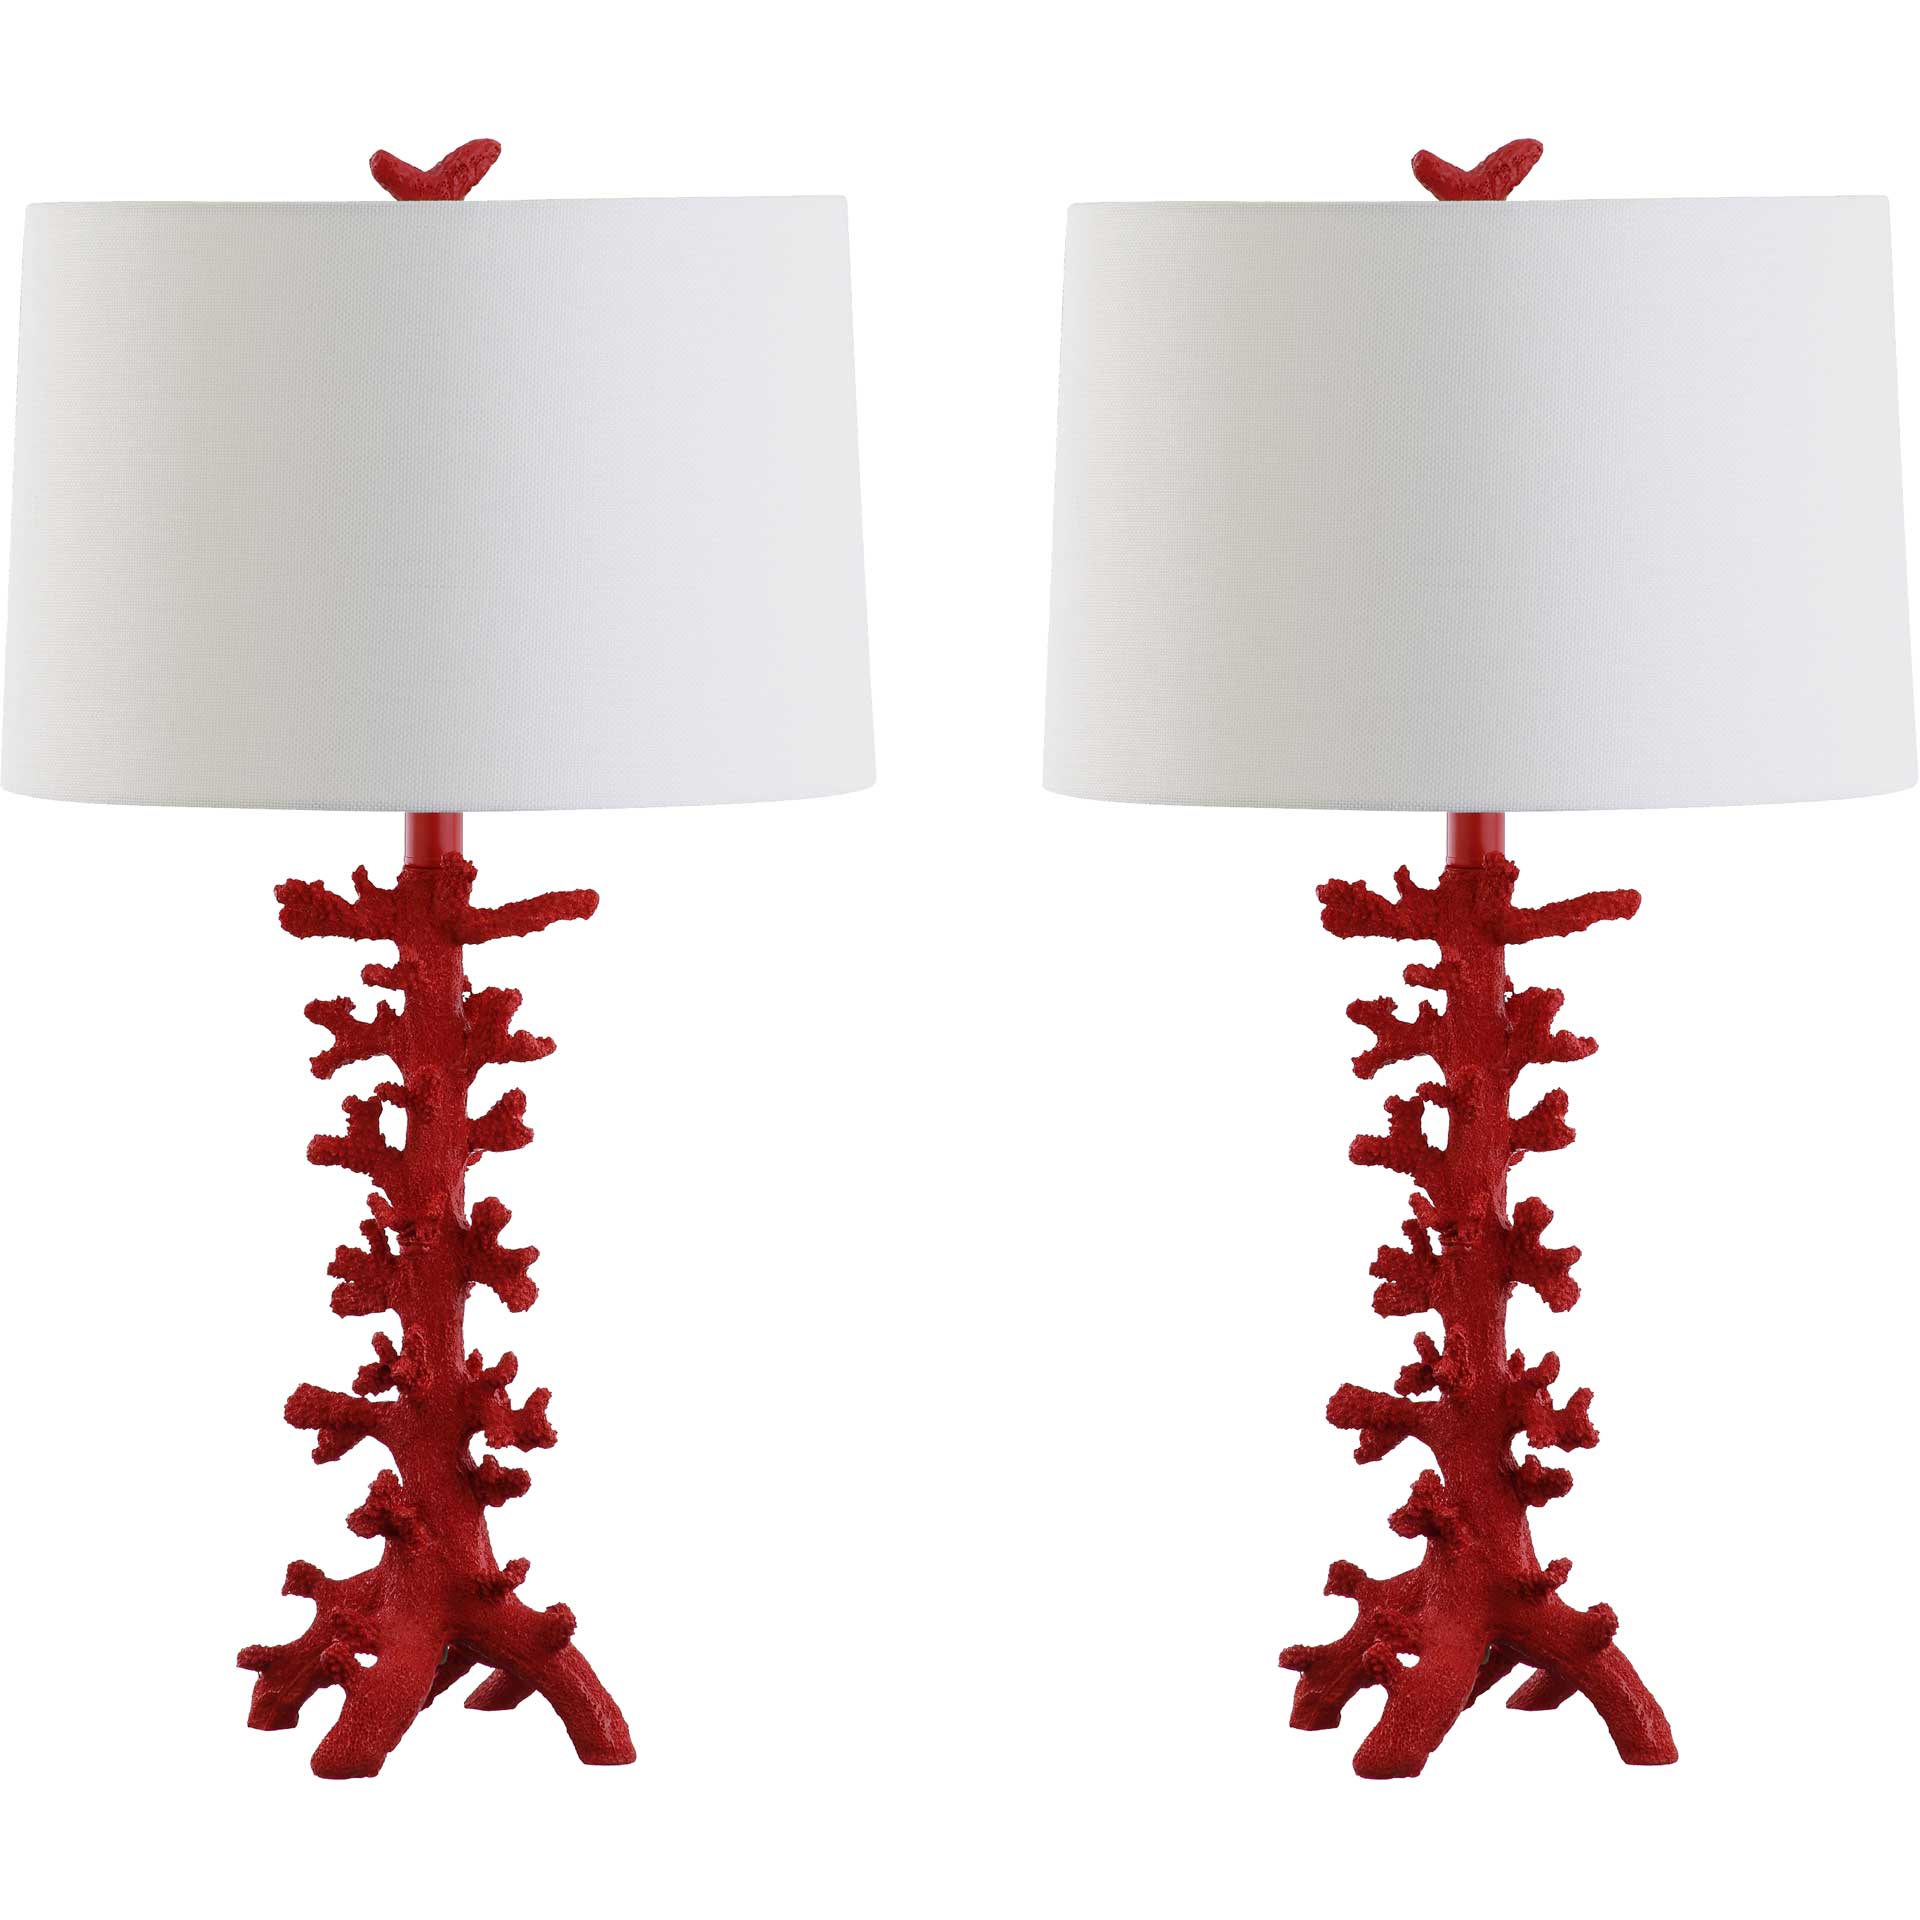 Rosa Coral Table Lamp Red (Set of 2)